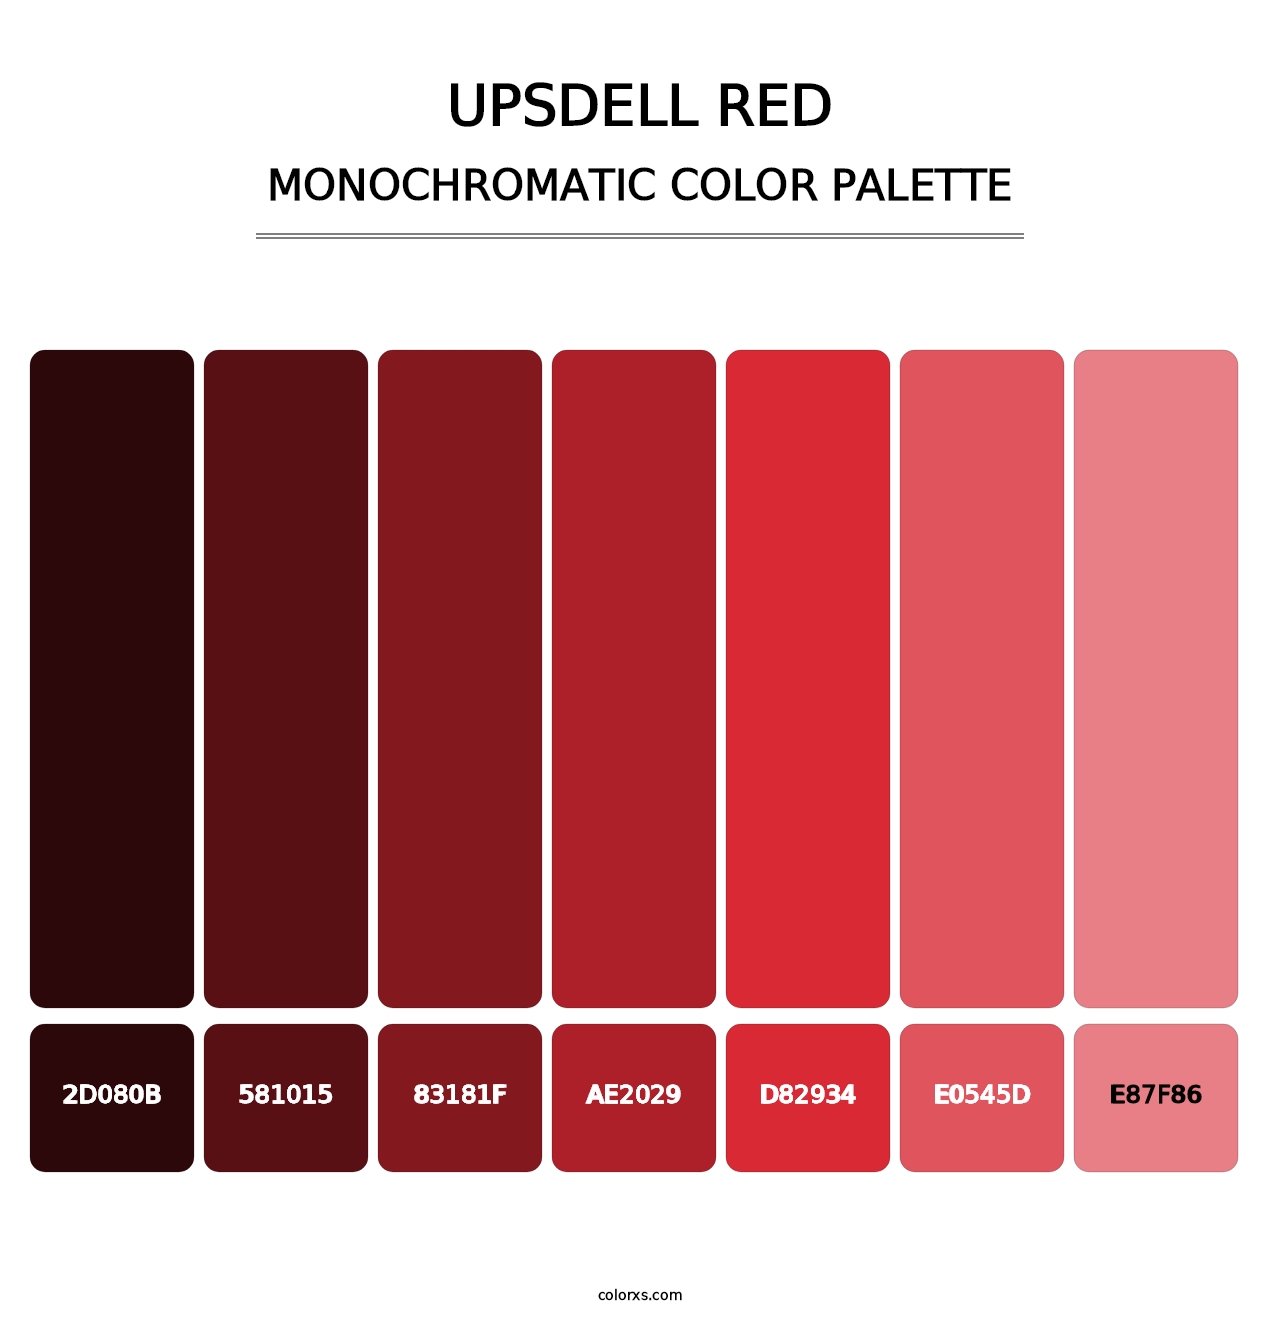 Upsdell Red - Monochromatic Color Palette